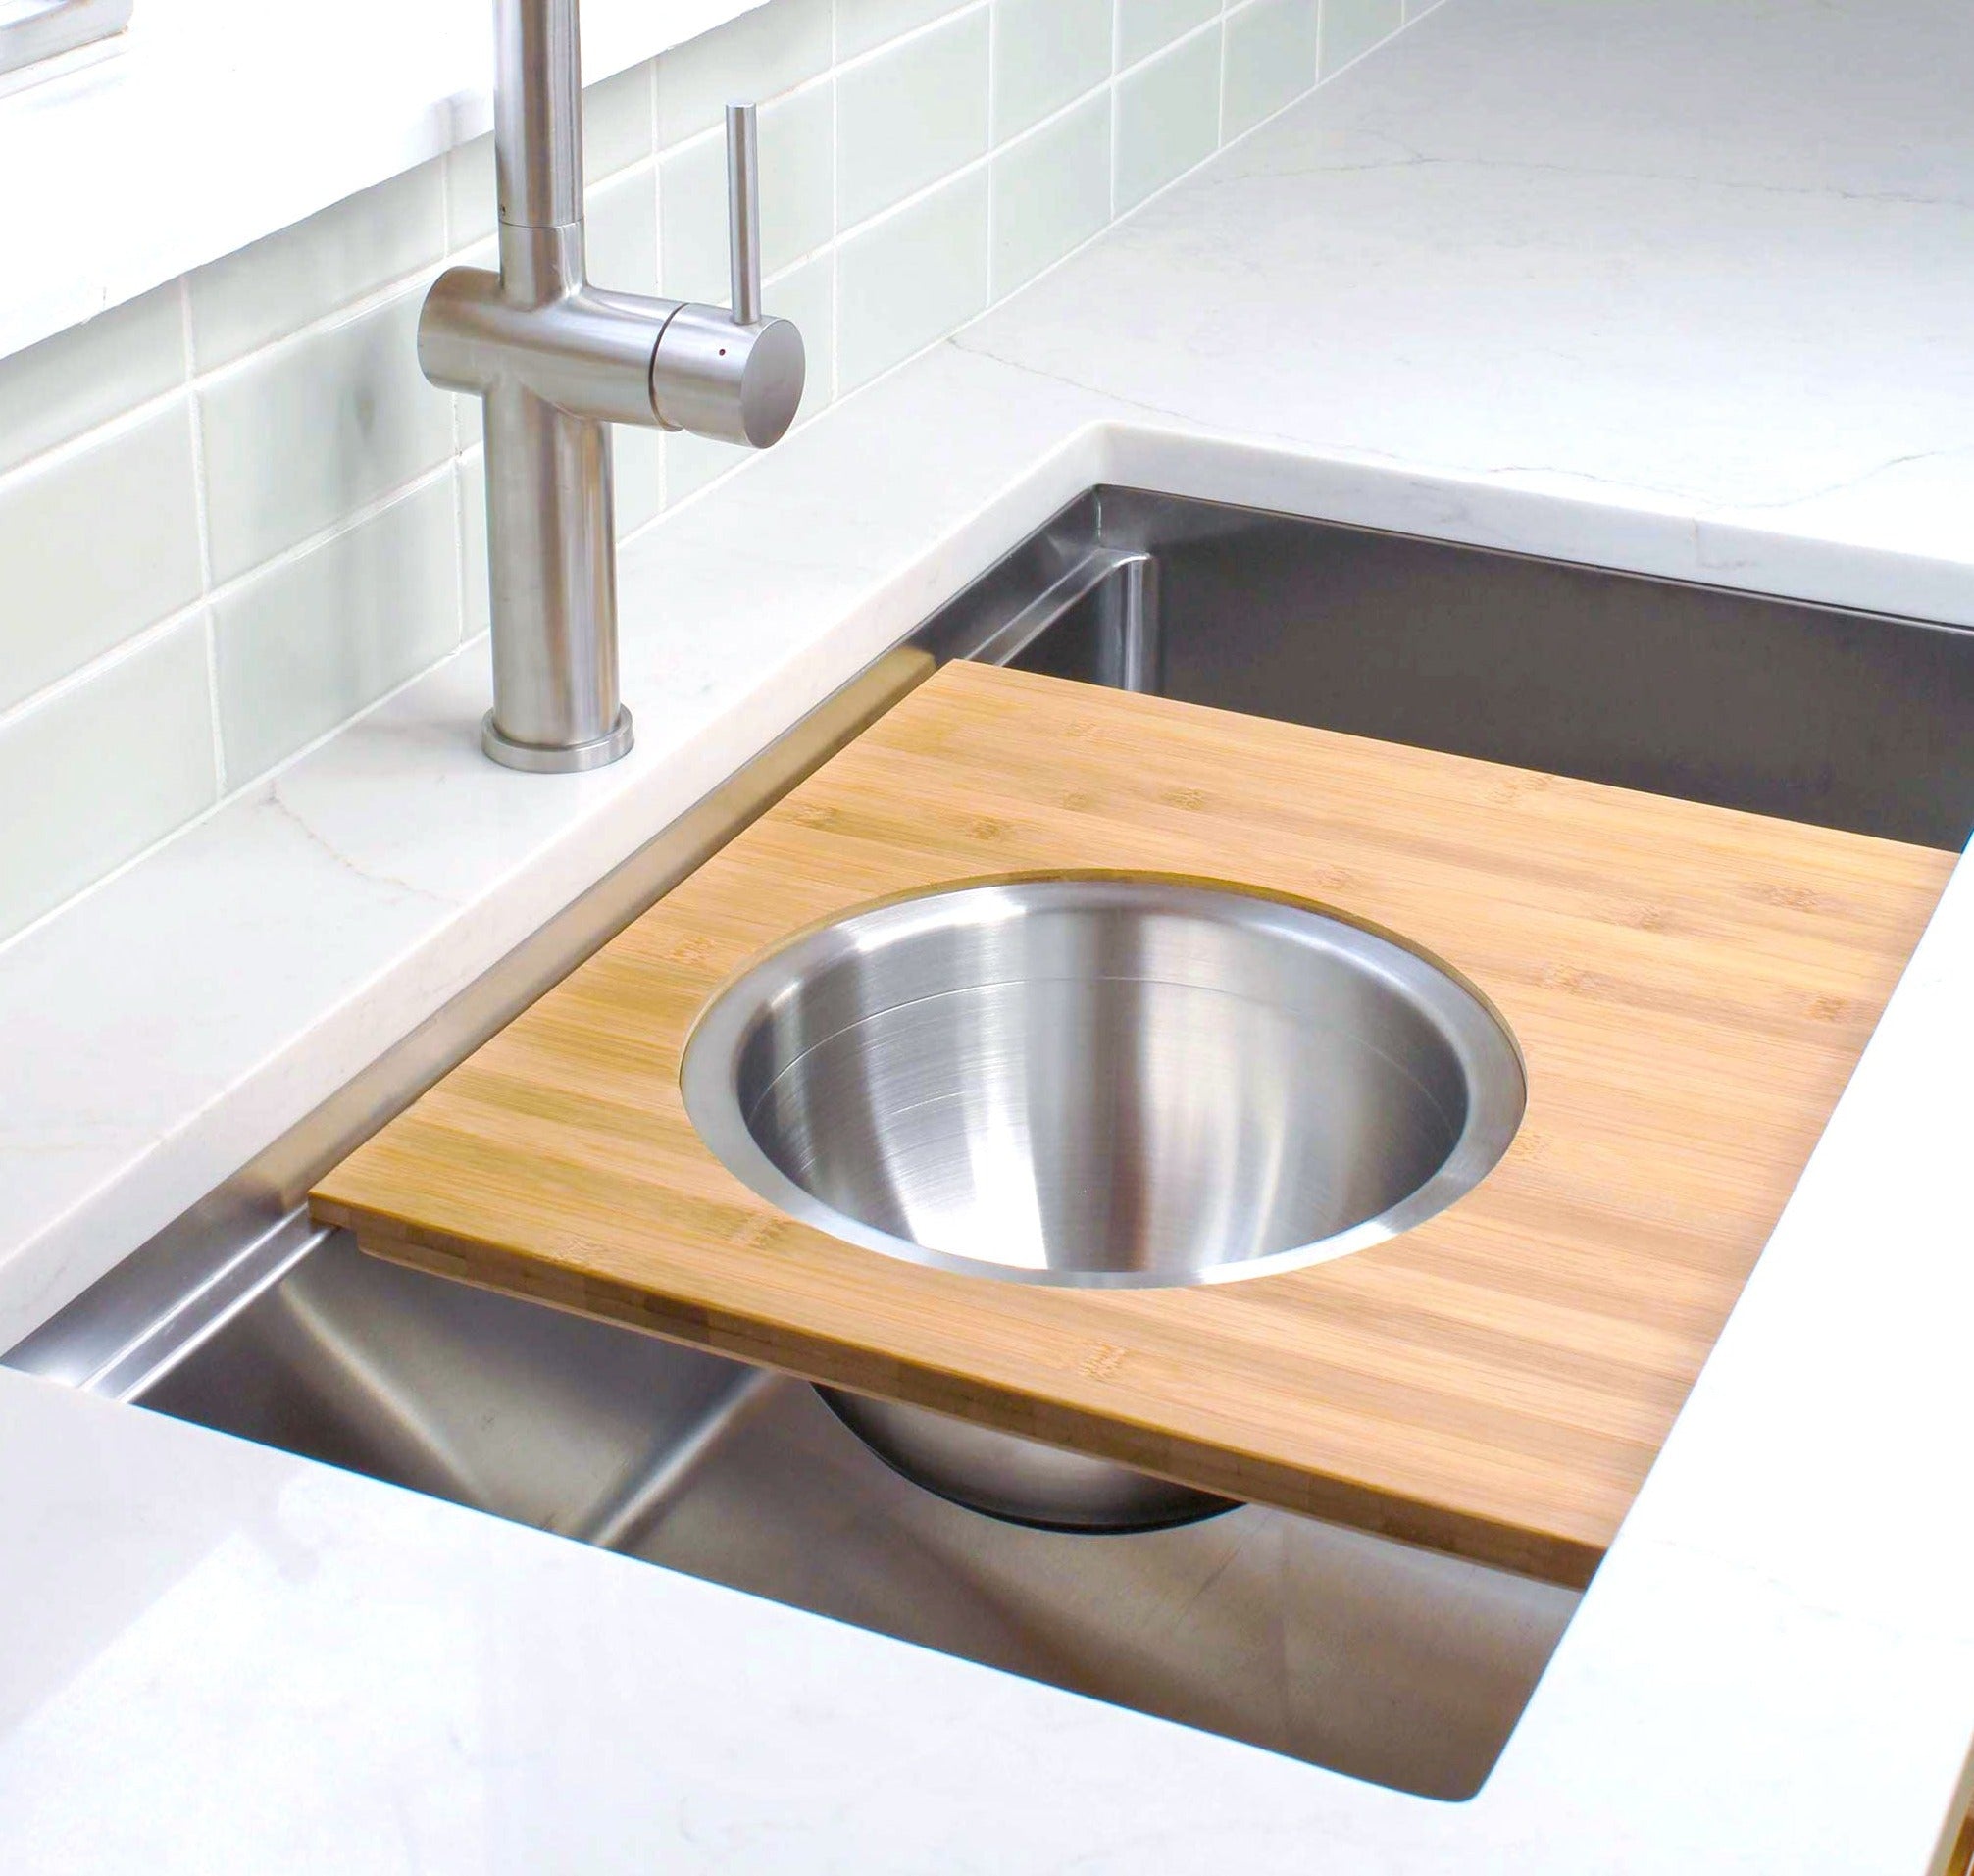 Workstation Sink Accessory - 18" Bamboo Cutting Board with 11" Stainless Steel Colander and Mixing Bowl